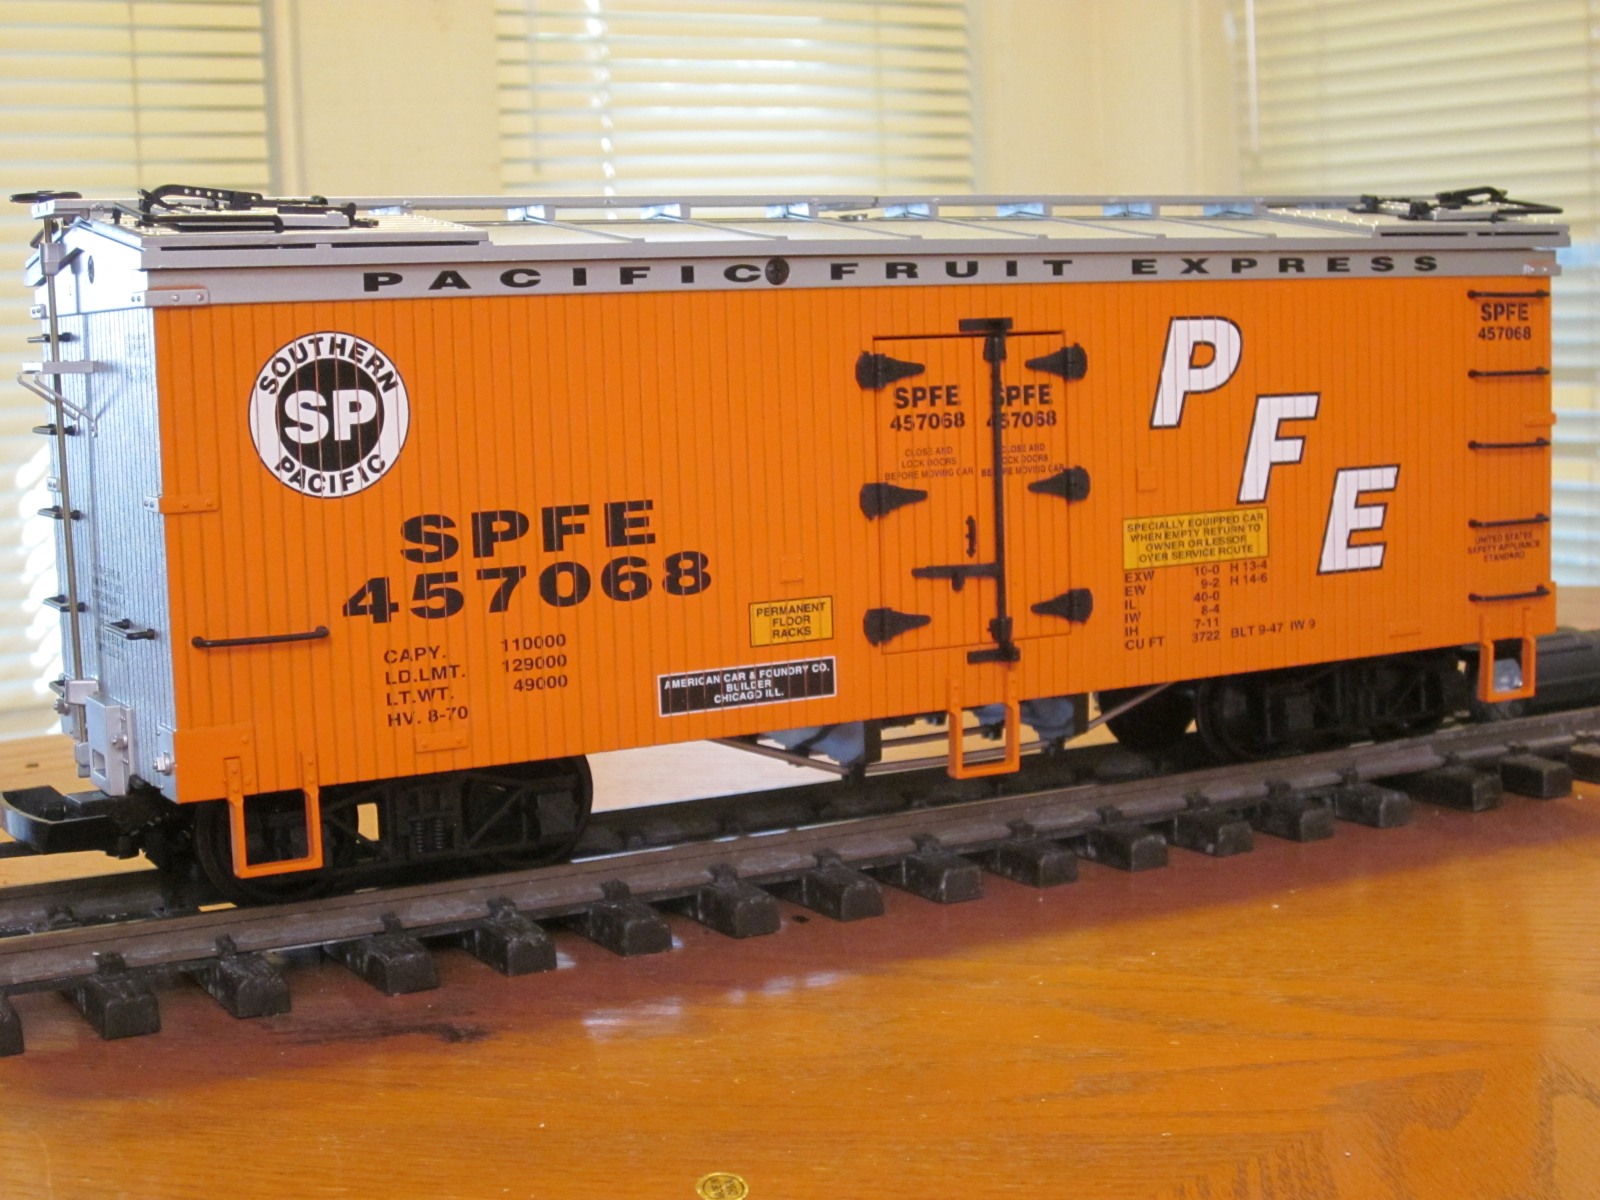 R16202A Southern Pacific PFE SPFE 457068